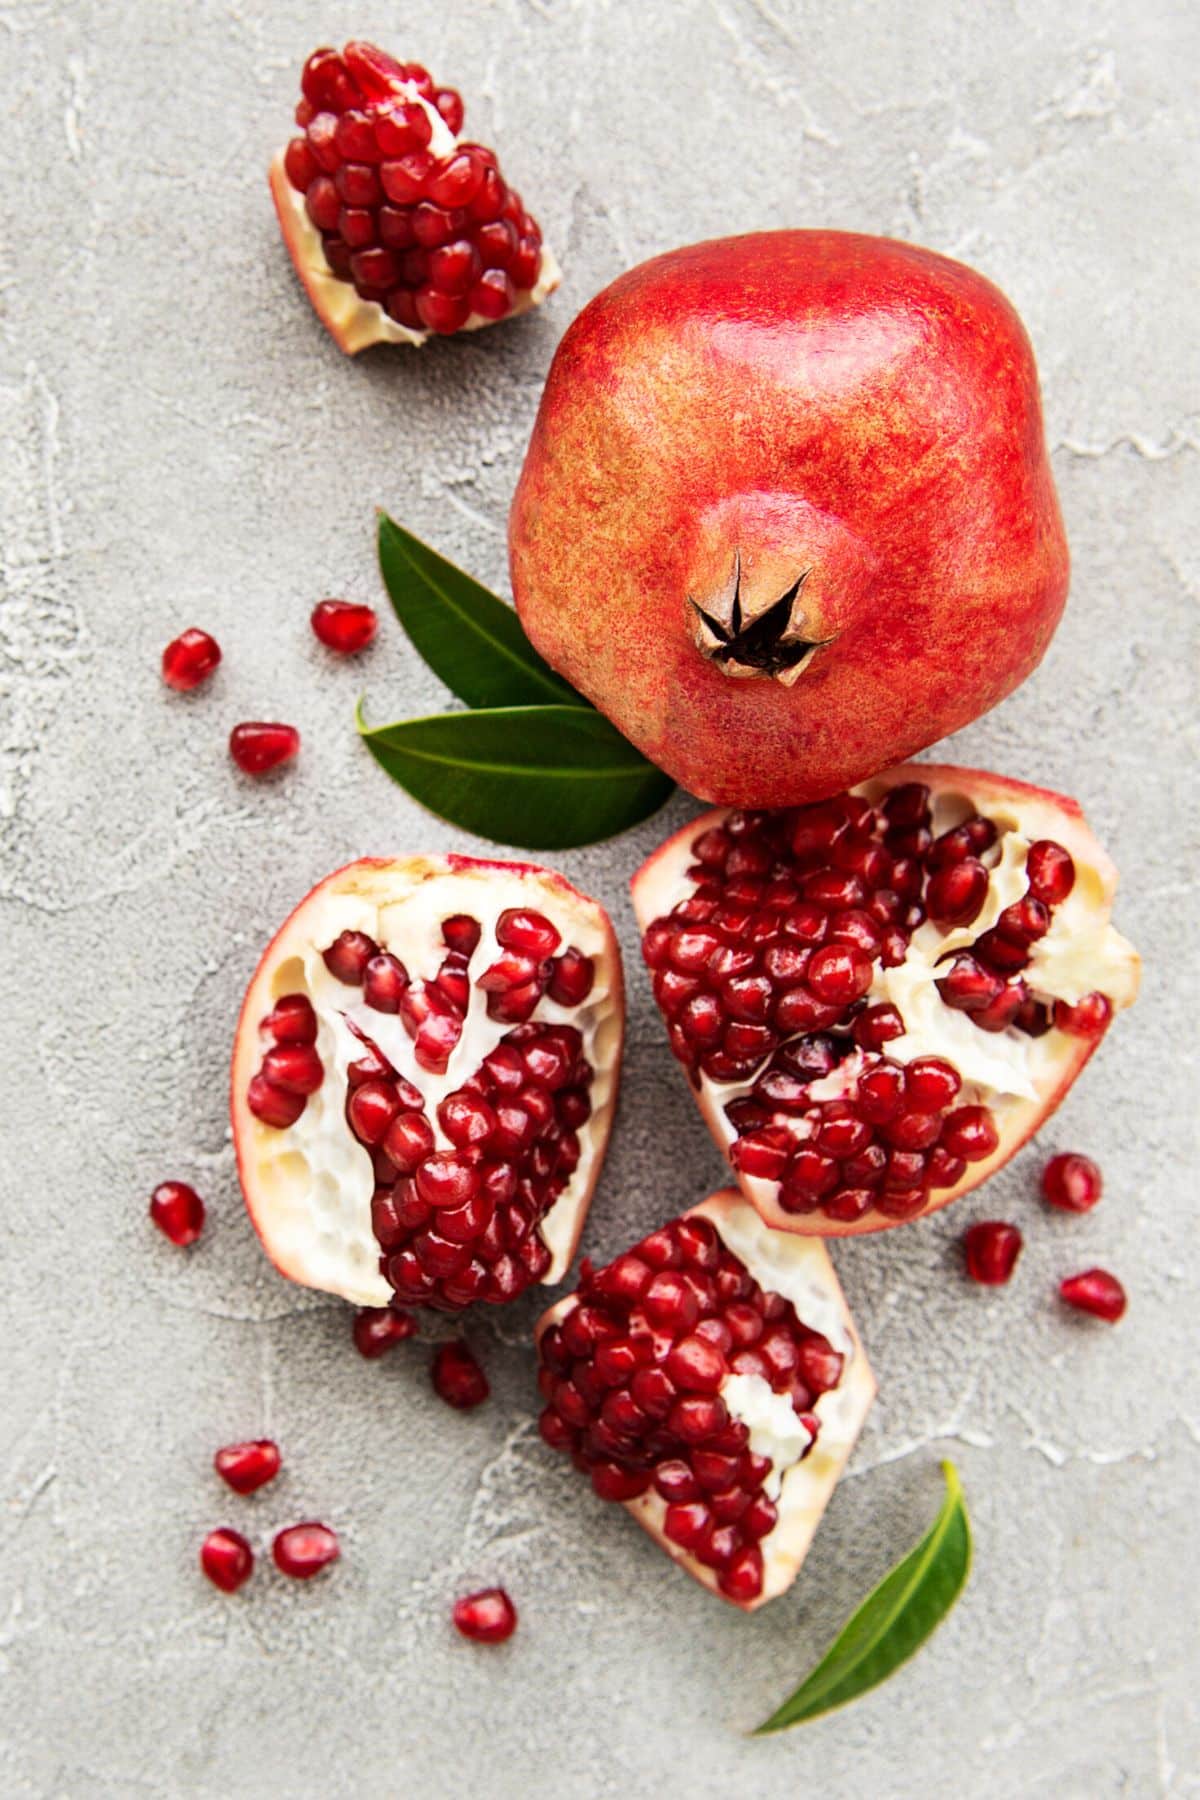 A whole pomegranate next to one that has been sectioned.